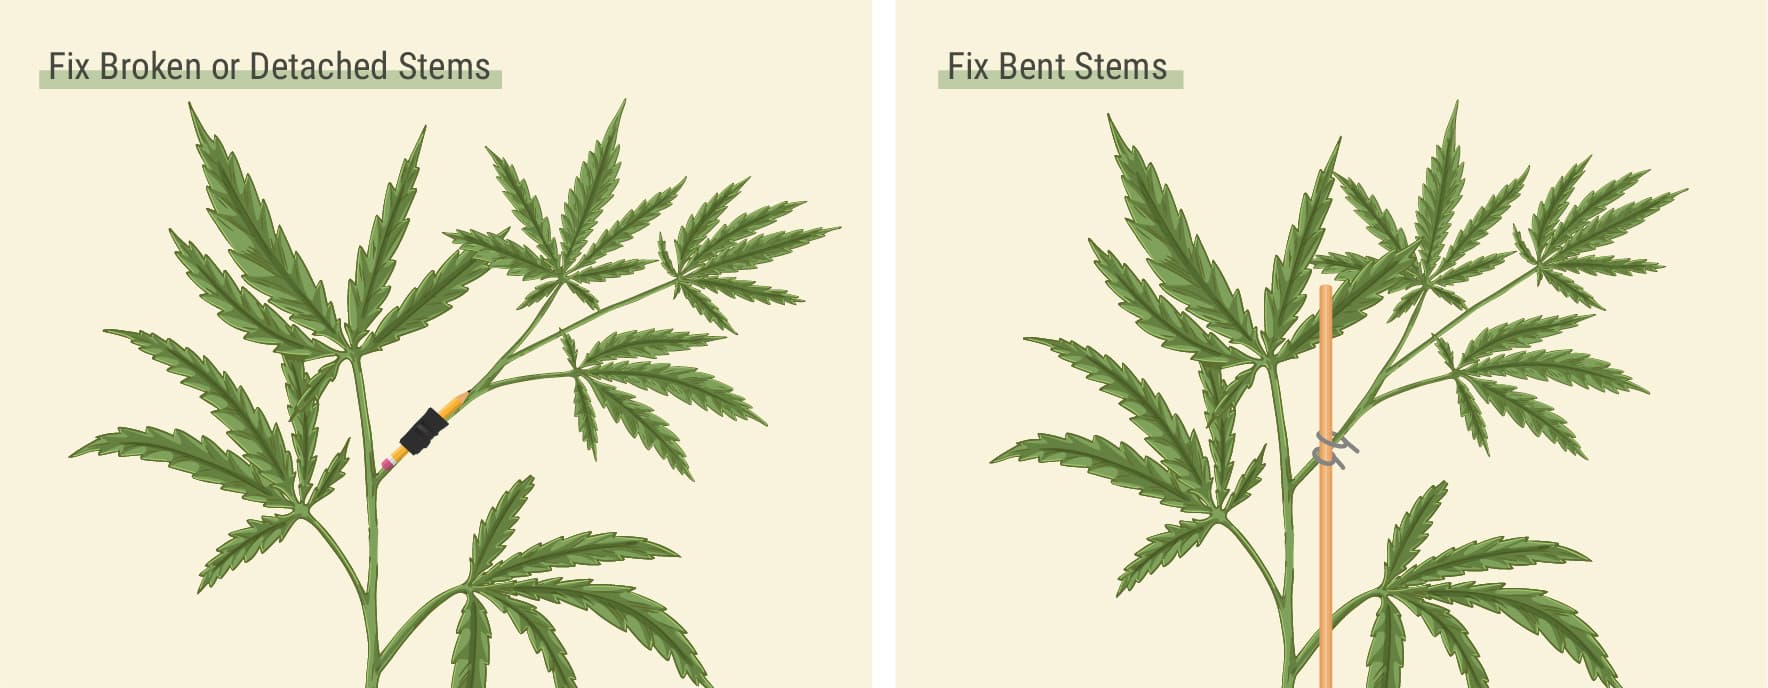 How Can You Fix Broken or Detached Stems?